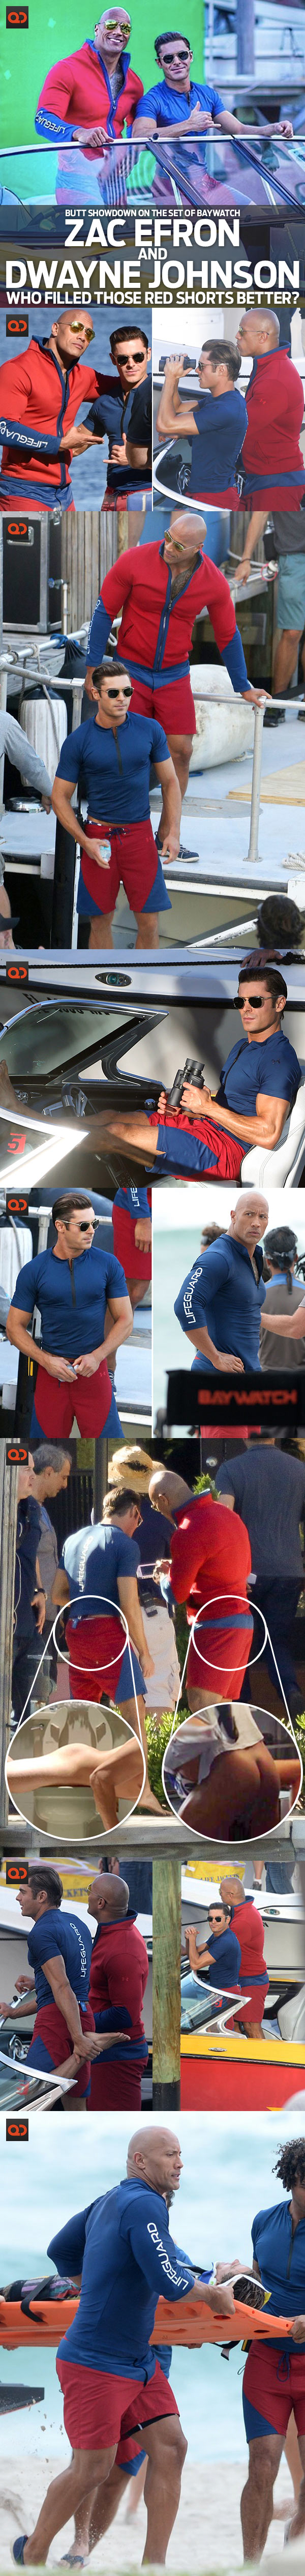 Zac Efron And Dwayne Johnson Had A Butt Showdown On The Set Of Baywatch - Who Filled Those Red Shorts Better?